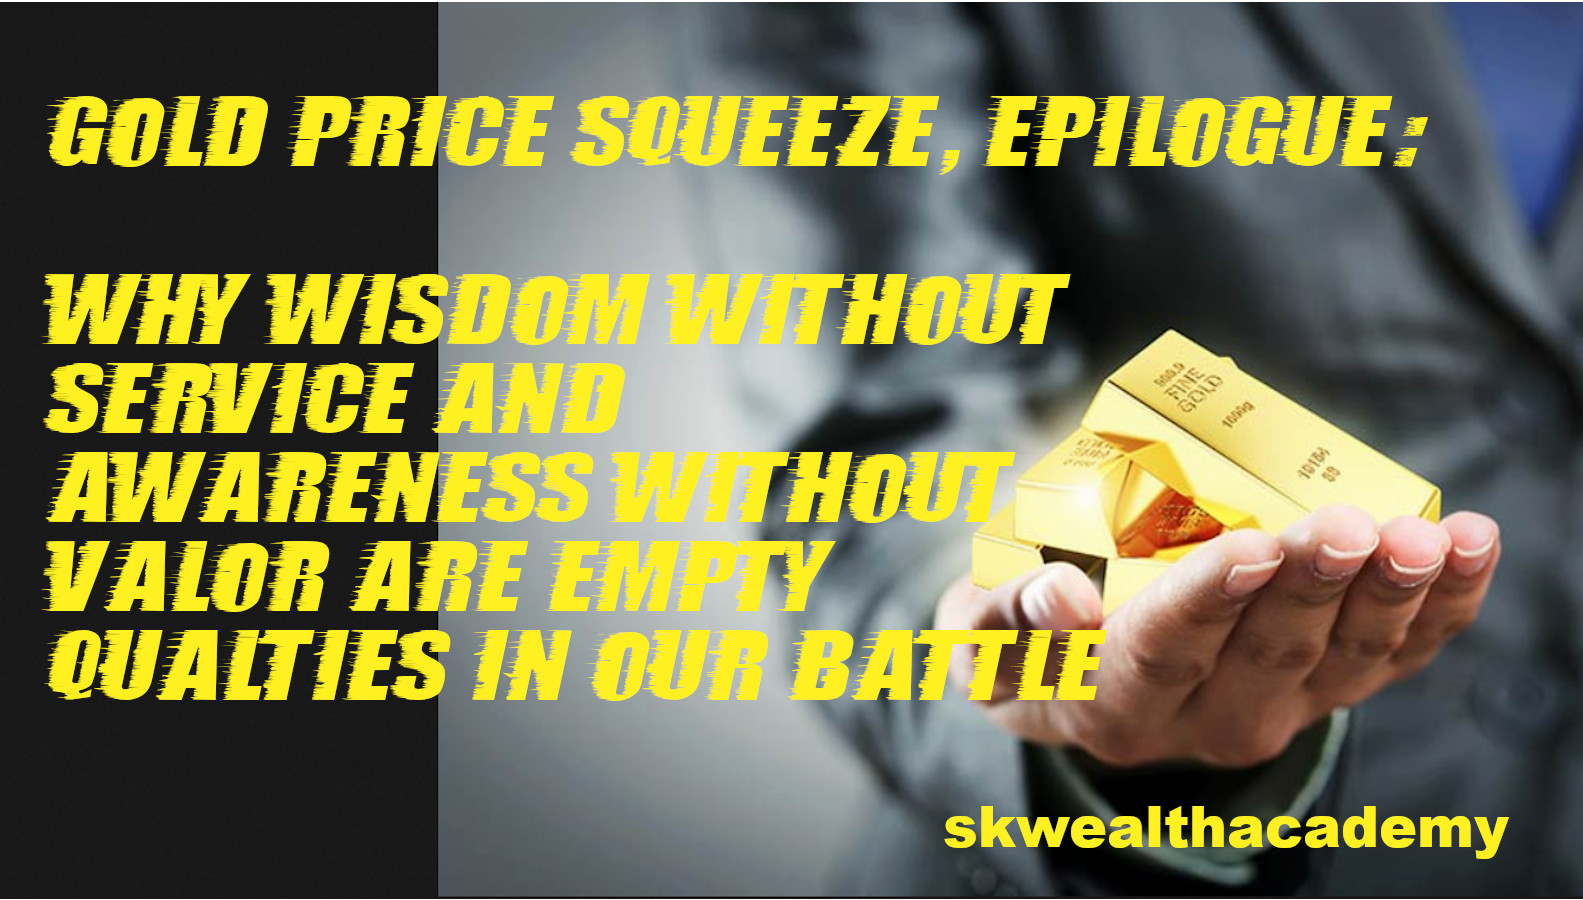 gold price squeeze campaign, skwealthacademy